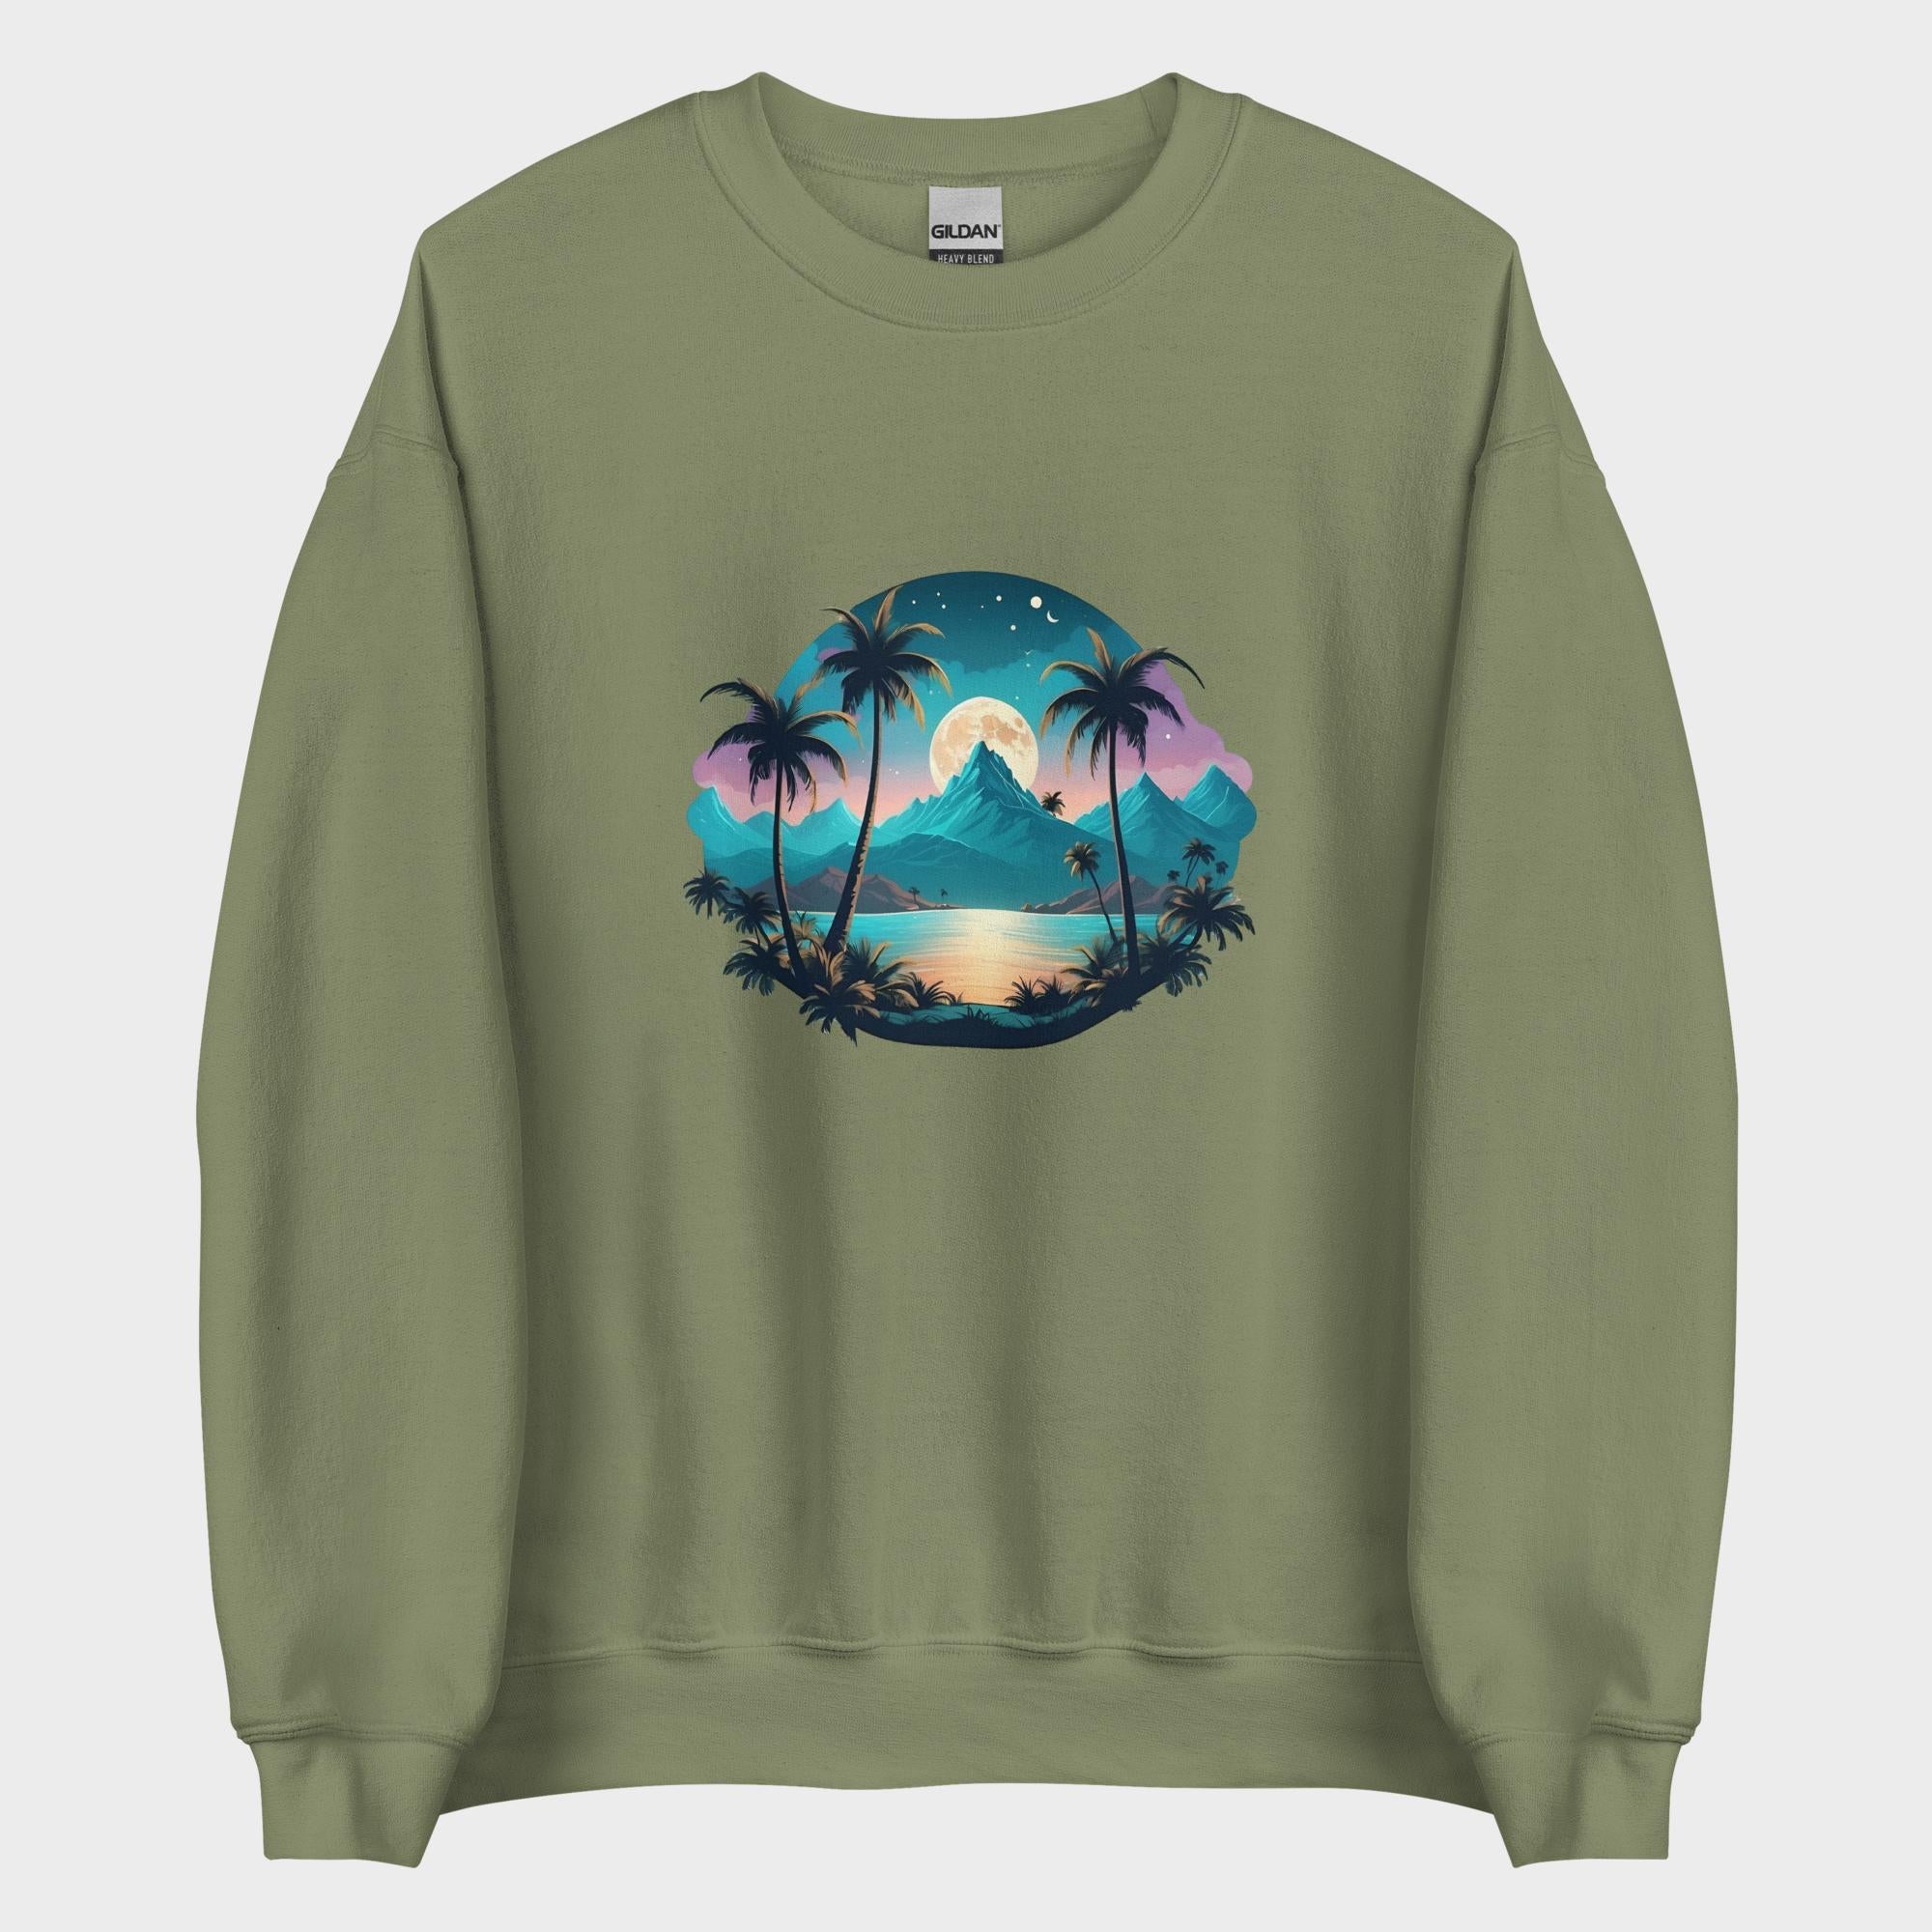 The Place To Be - Sweatshirt